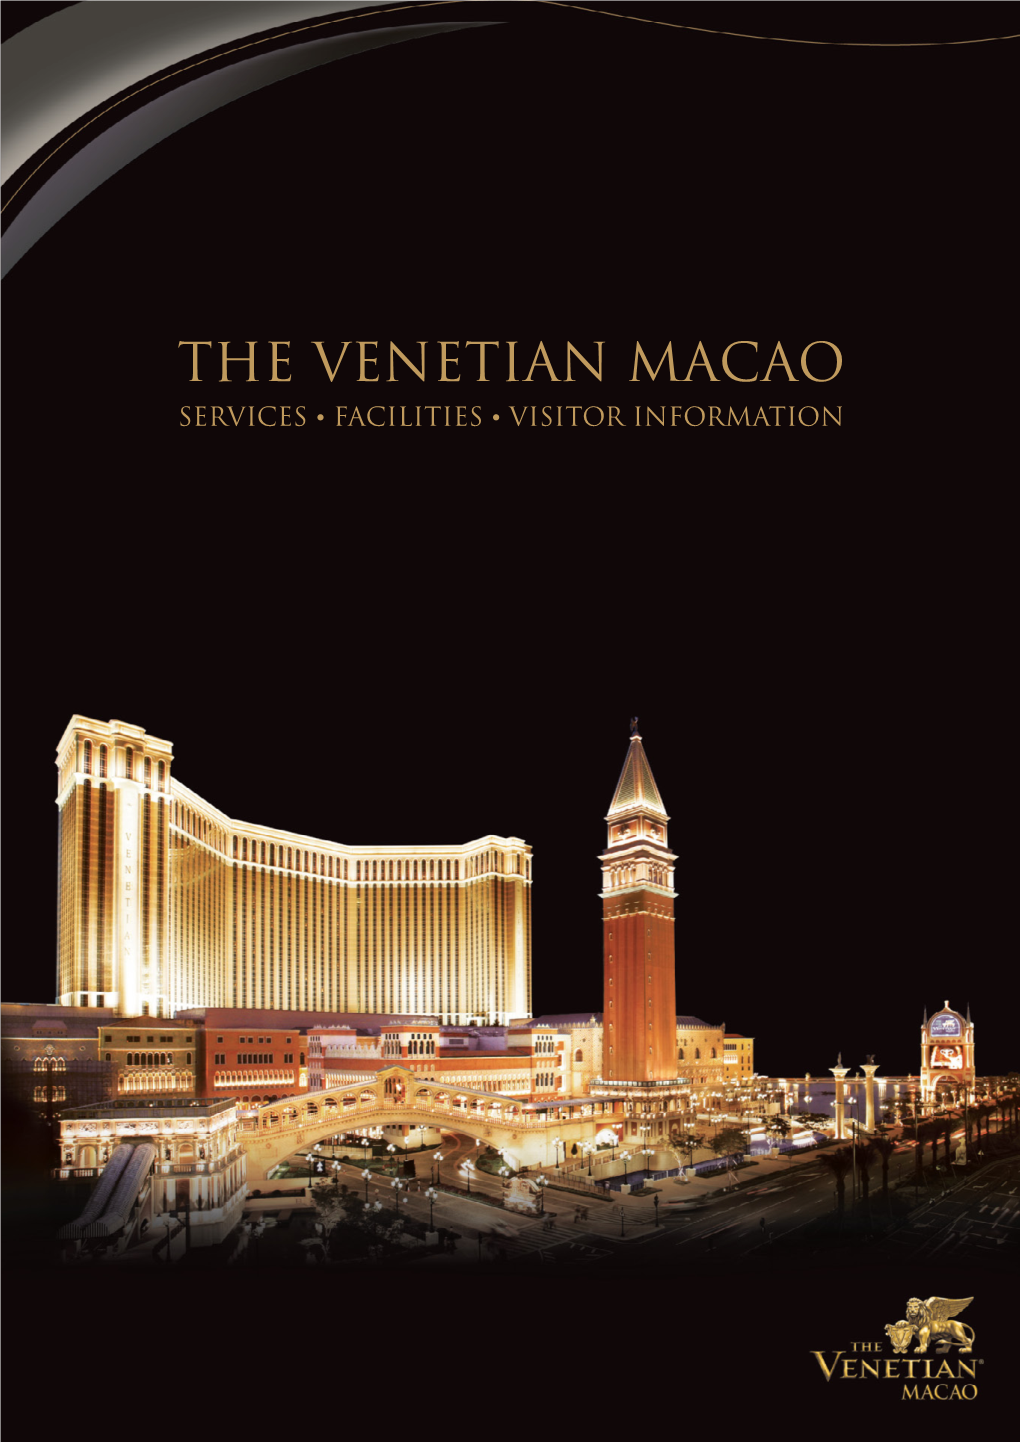 The Venetian Macao SERVICES • FACILITIES • VISITOR INFORMATION YOU DECIDE